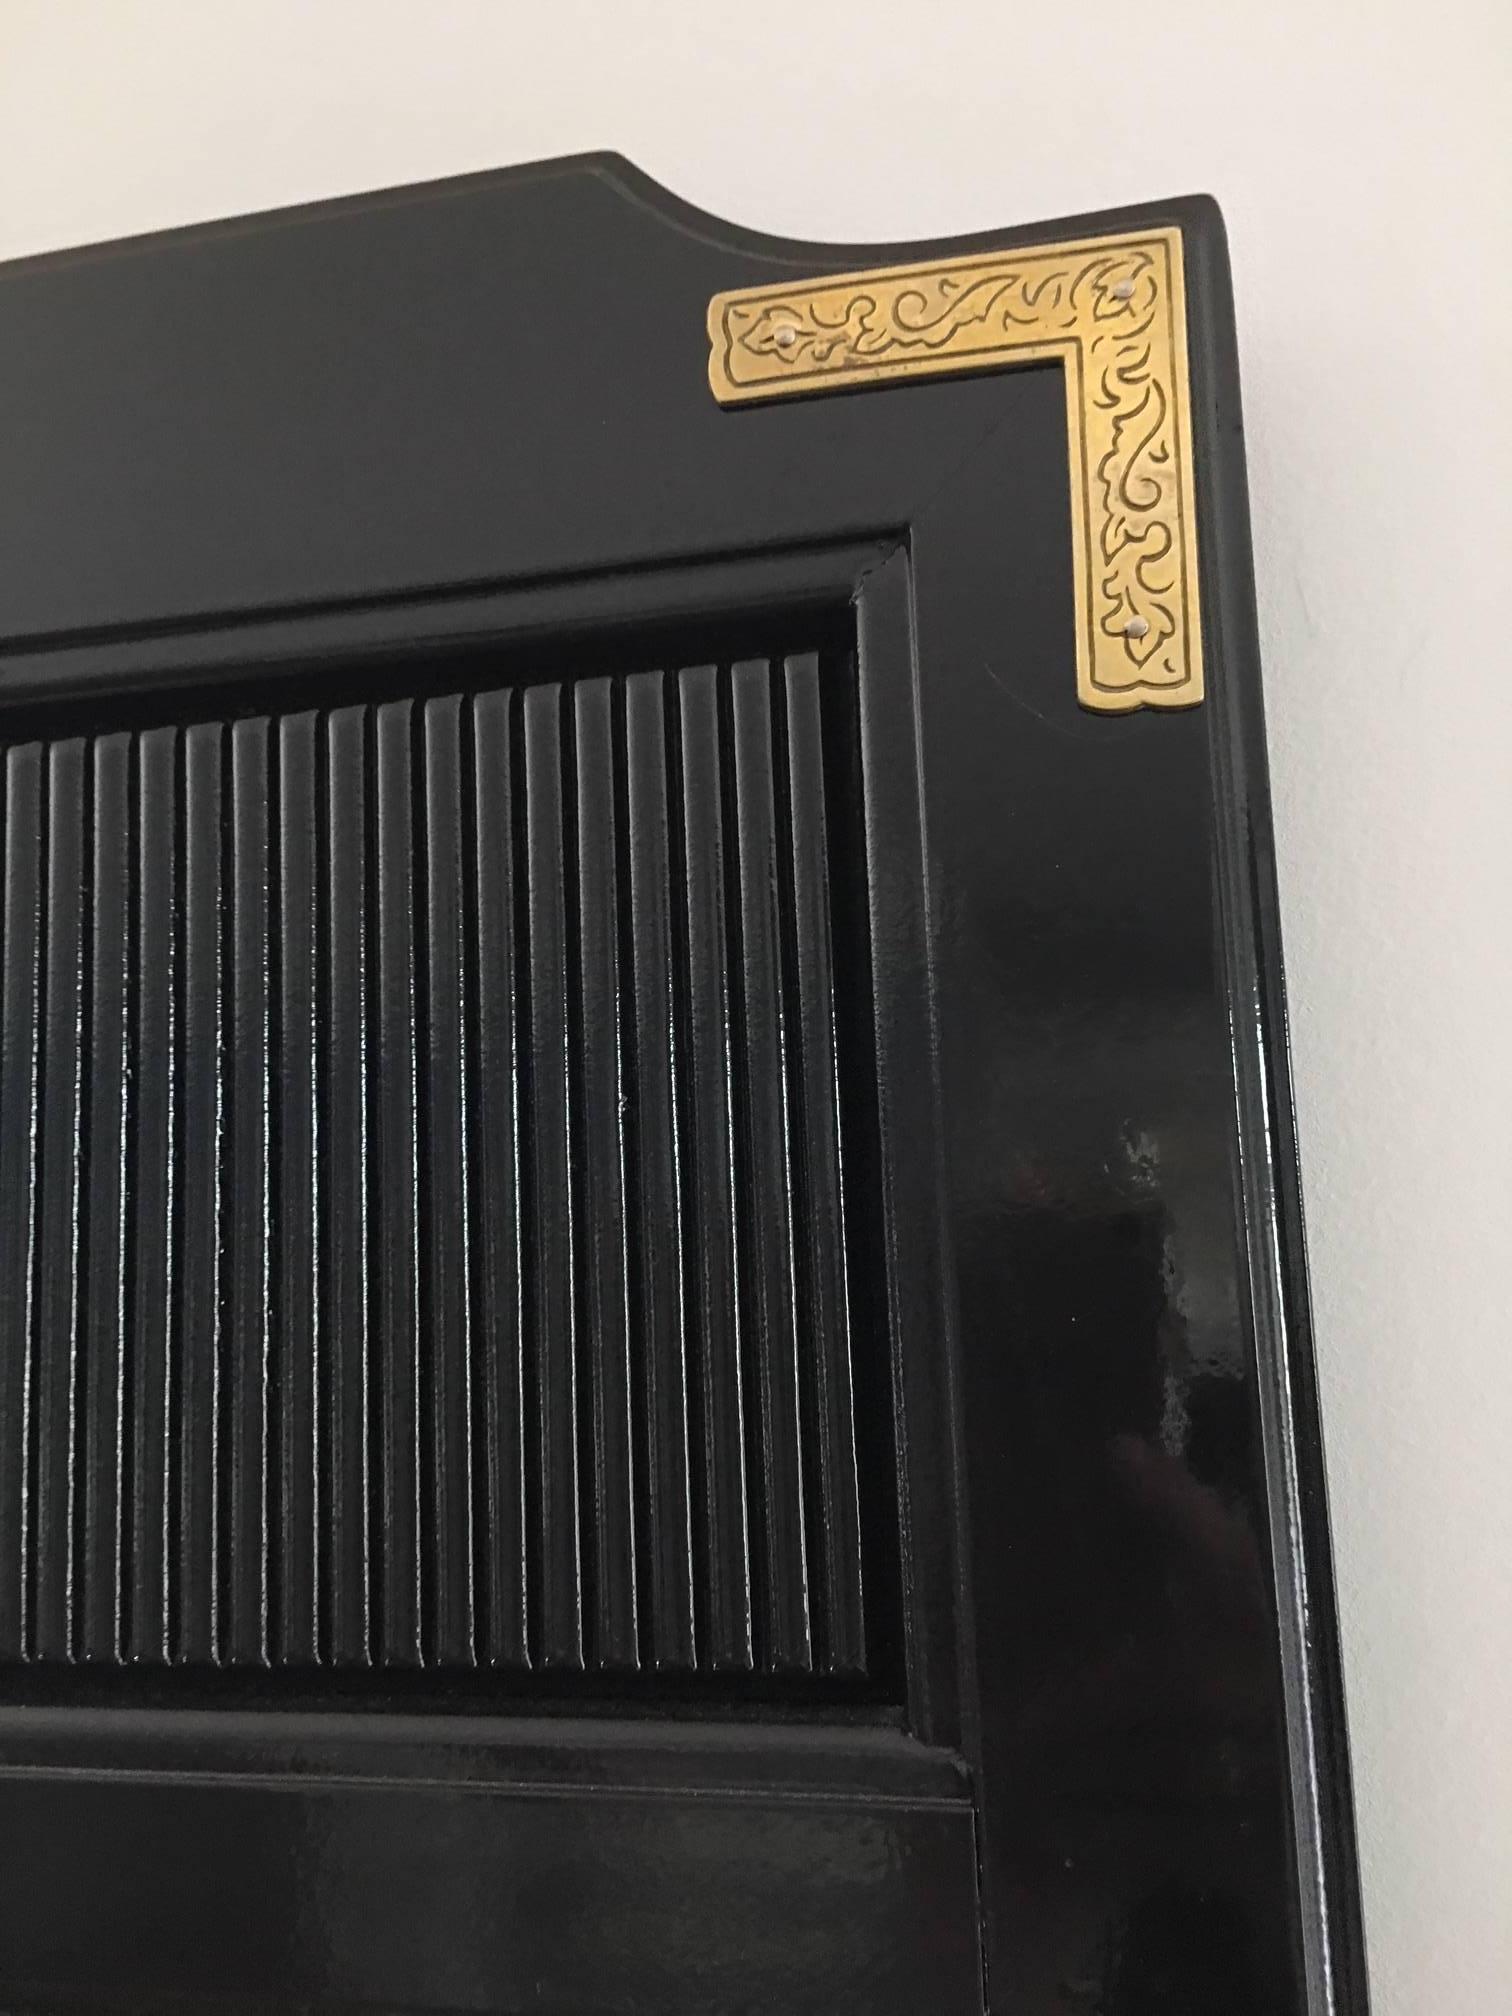 This perfect black mirror will go almost anywhere in your home. Great size to top a dresser, console, or entry table. Etched brass corners.